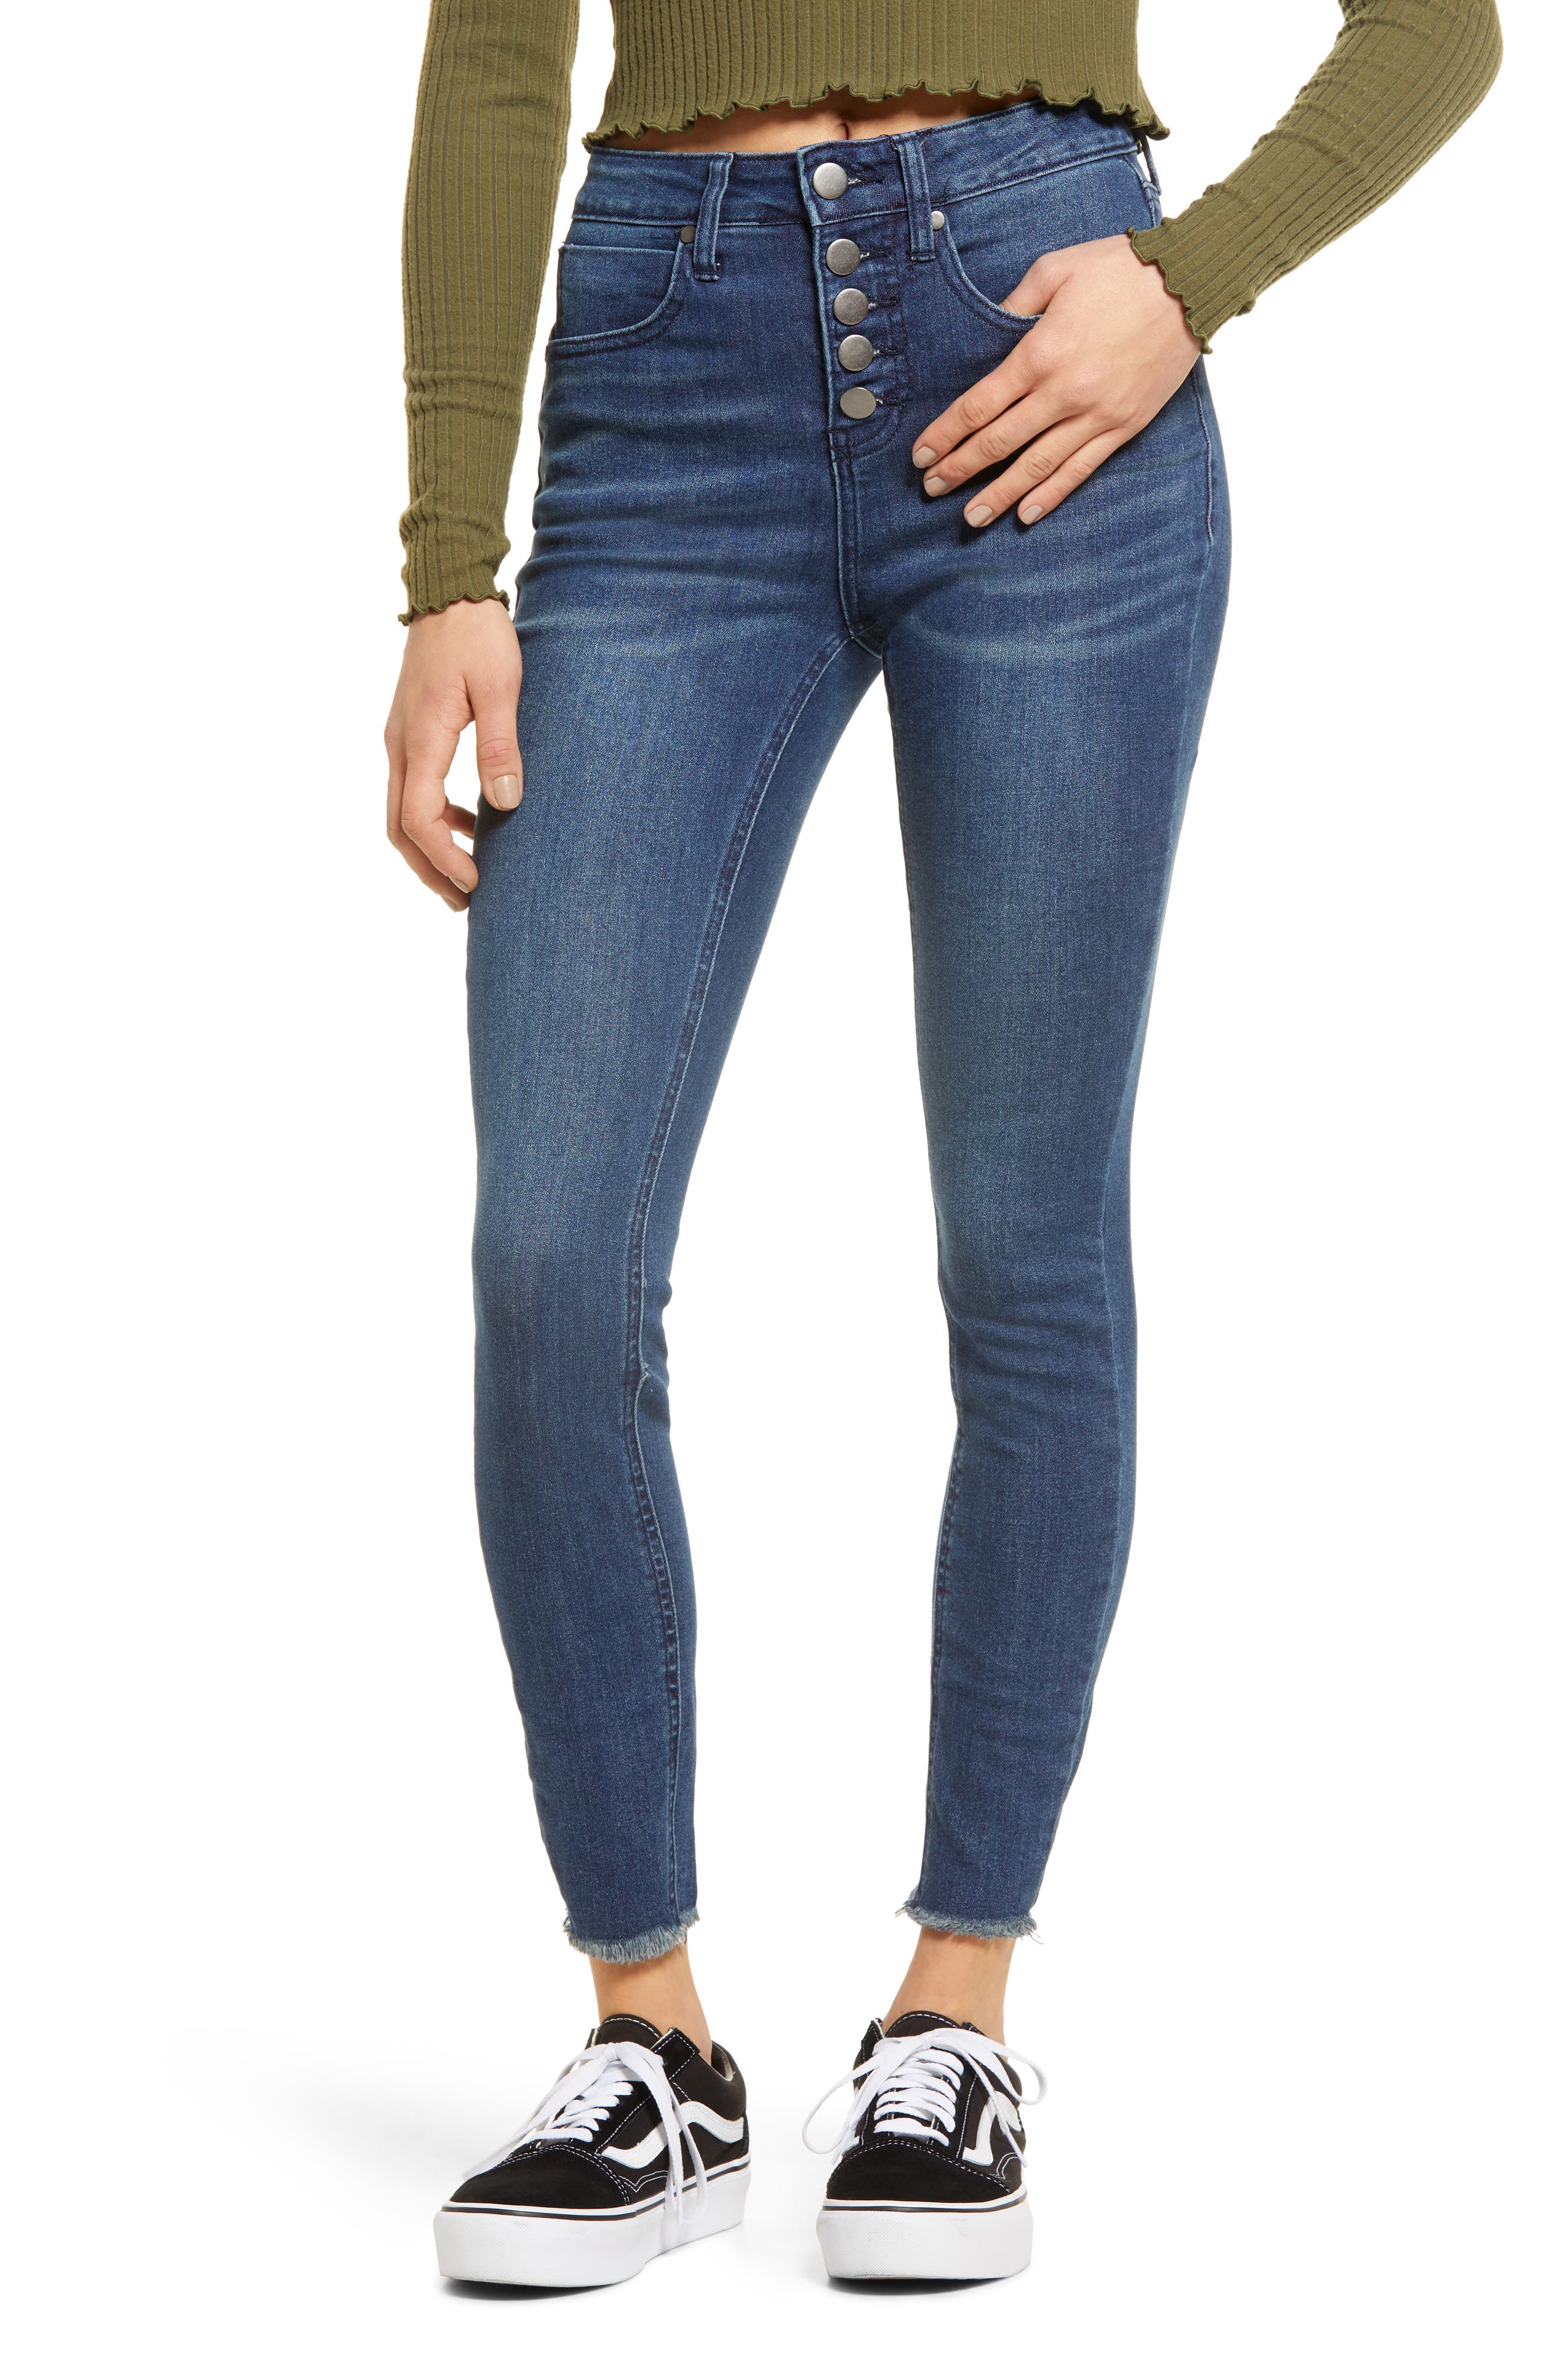 button fly jeans womens